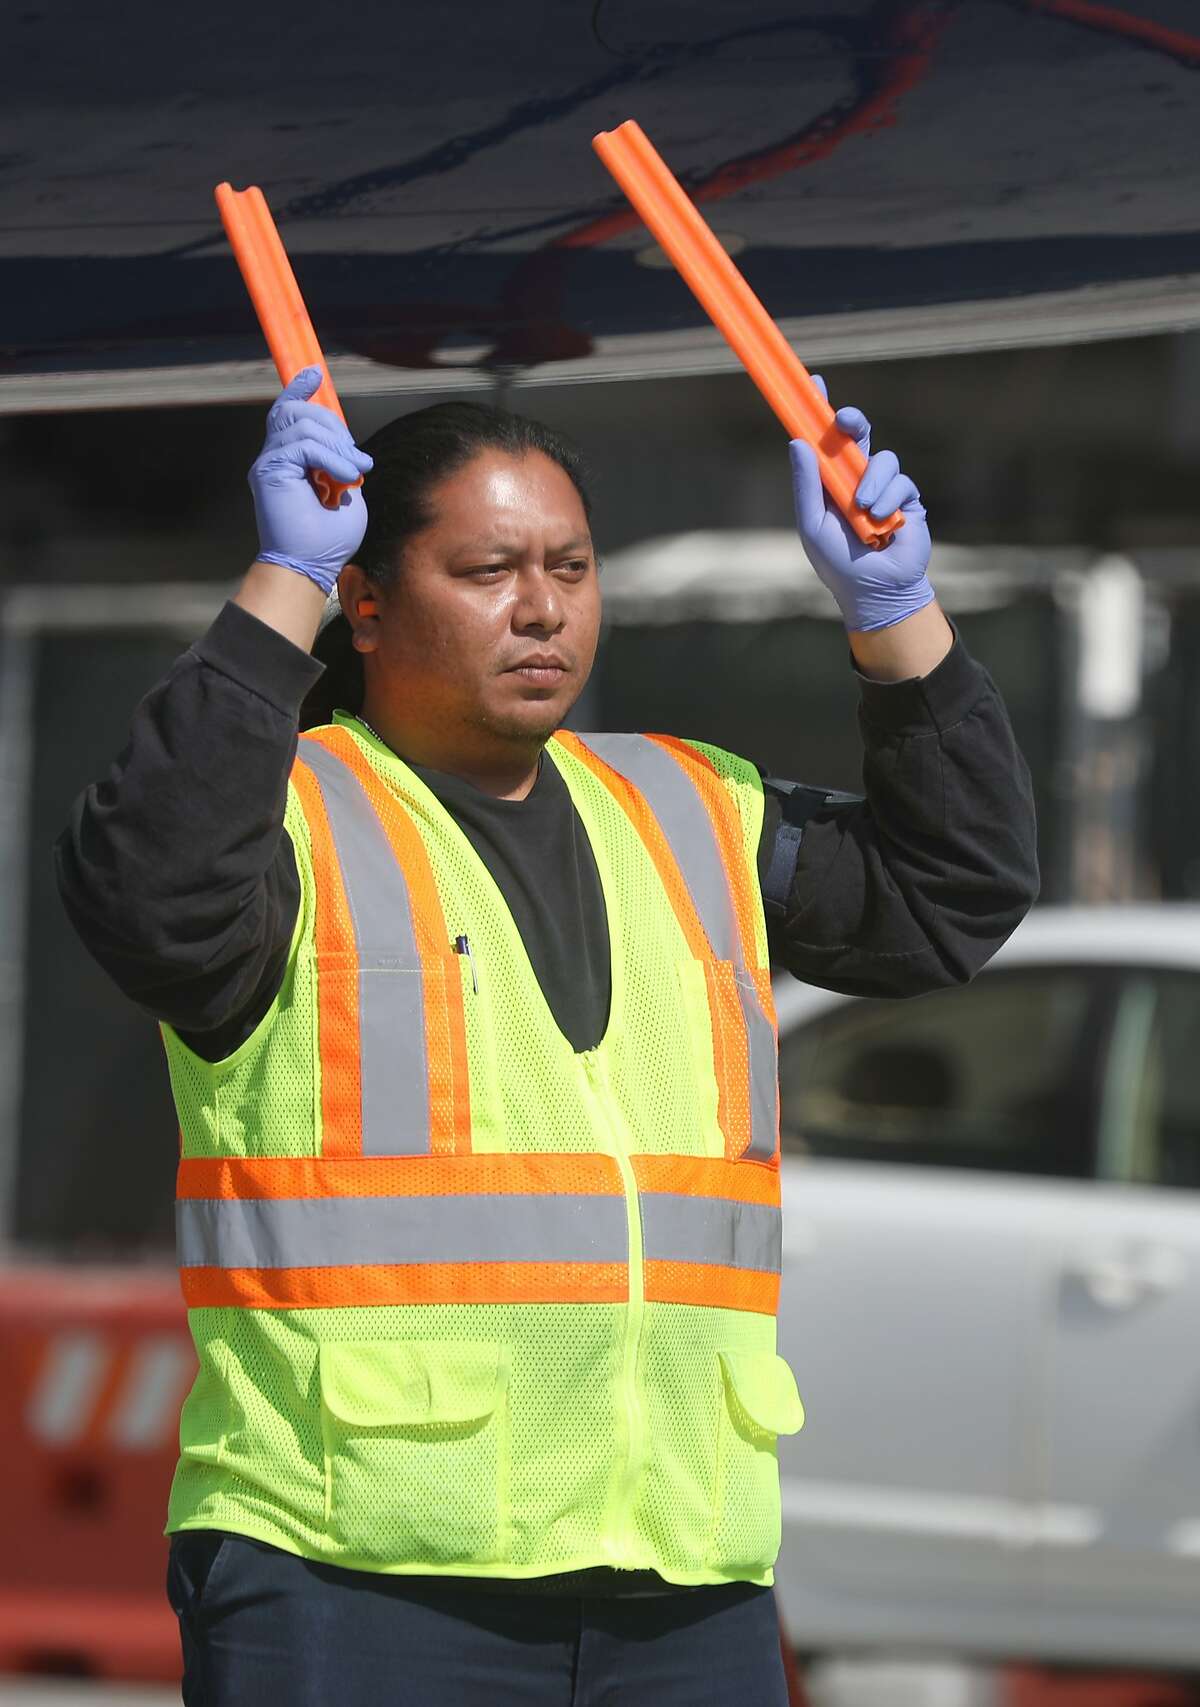 A ground air transportation employee guides a vehicle working on a plane that just landed on Thursday, Sept. 6, 2018 in San Francisco, Calif. Recent contract negotiations between the city and unionized SFO workers resulted in higher minimum wages.